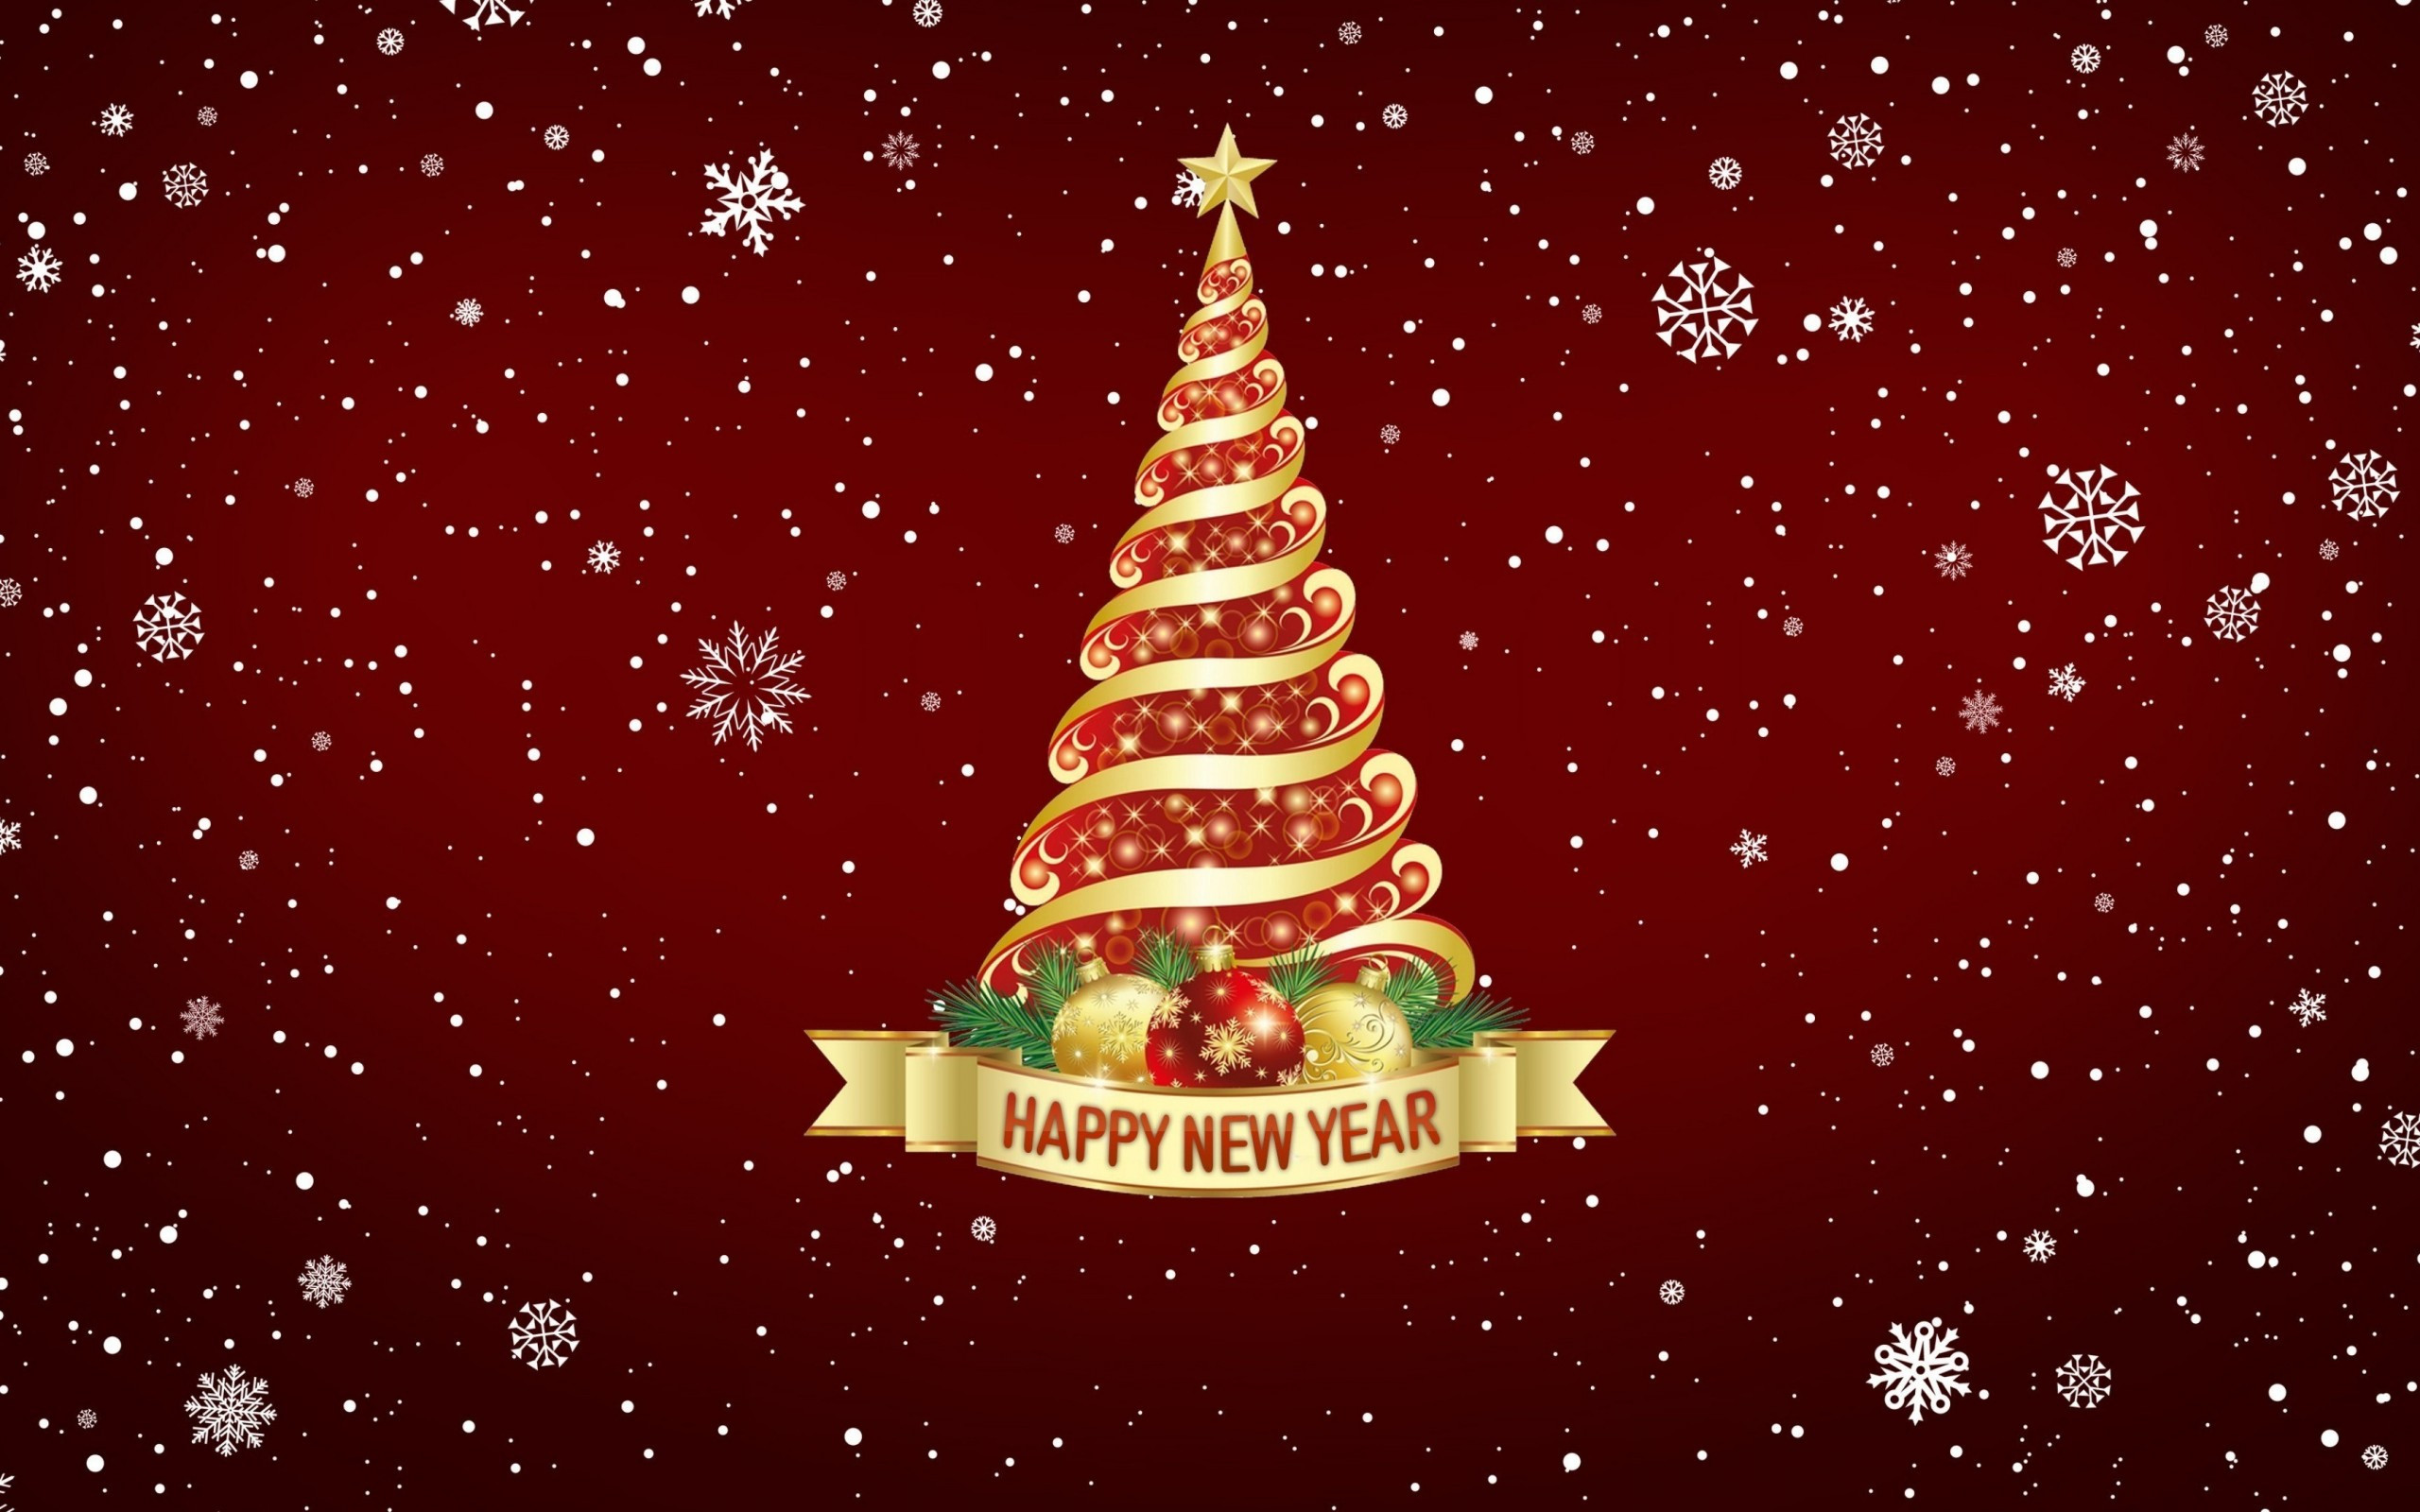 Download 2560x1600 Happy New Year Christmas Tree, Snowflakes, Design Wallpaper for MacBook Pro 13 inch